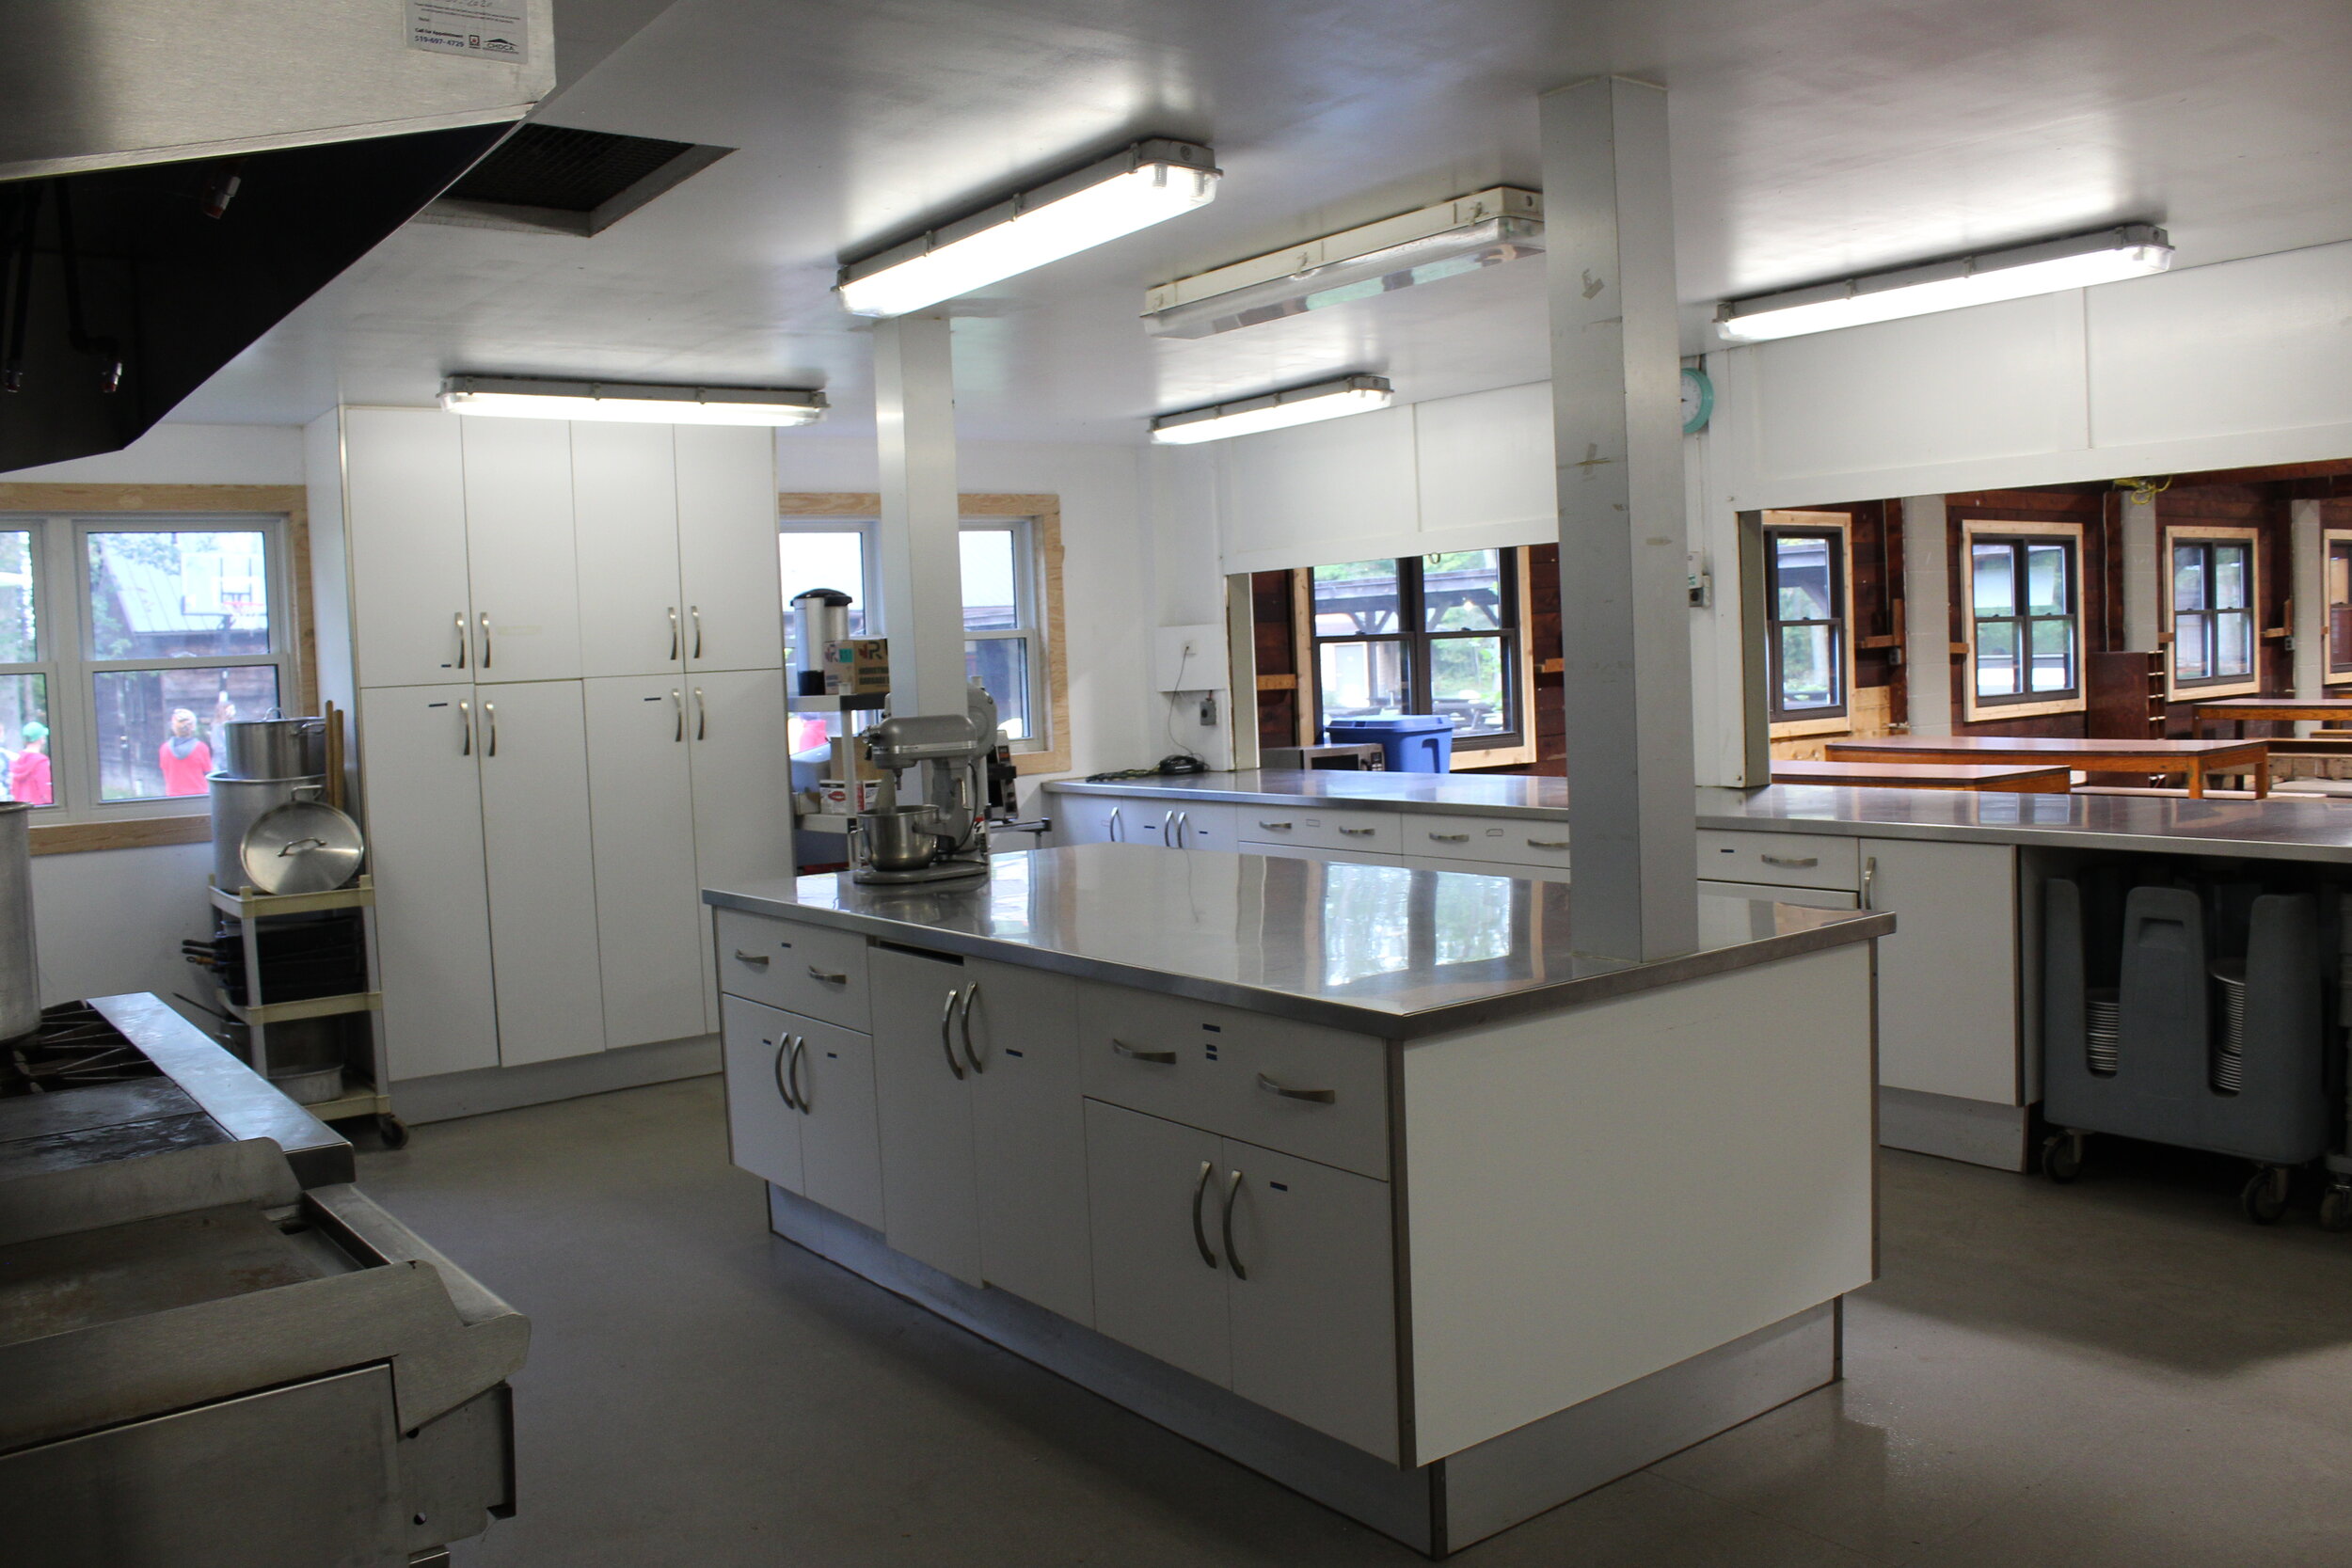 The kitchen's large, bright workspace opens up into the Dining Hall